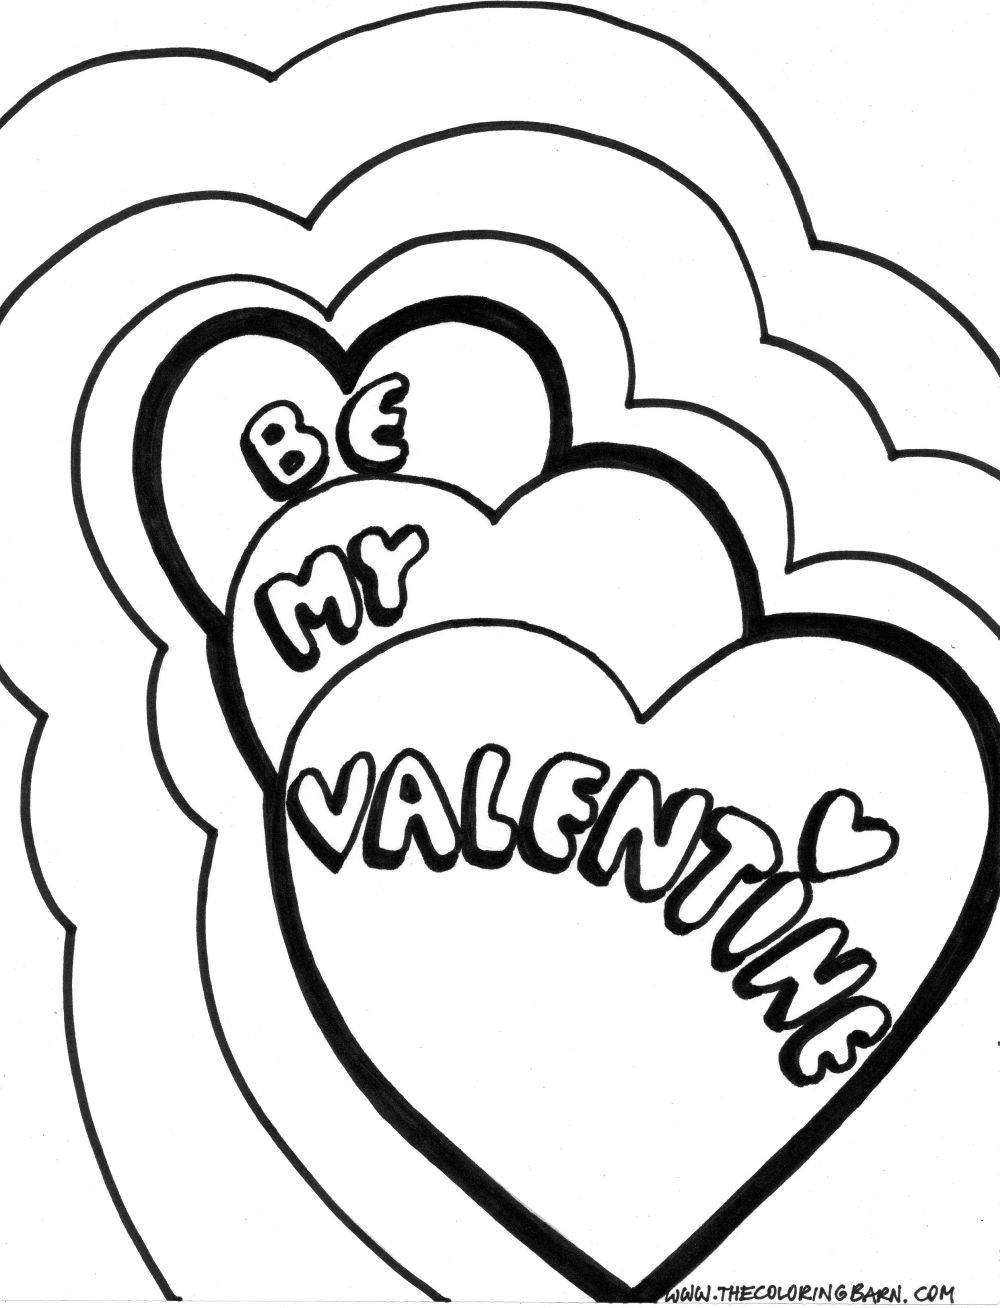 printable-happy-valentine-s-day-flowers-coloring-page-for-kids-supplyme